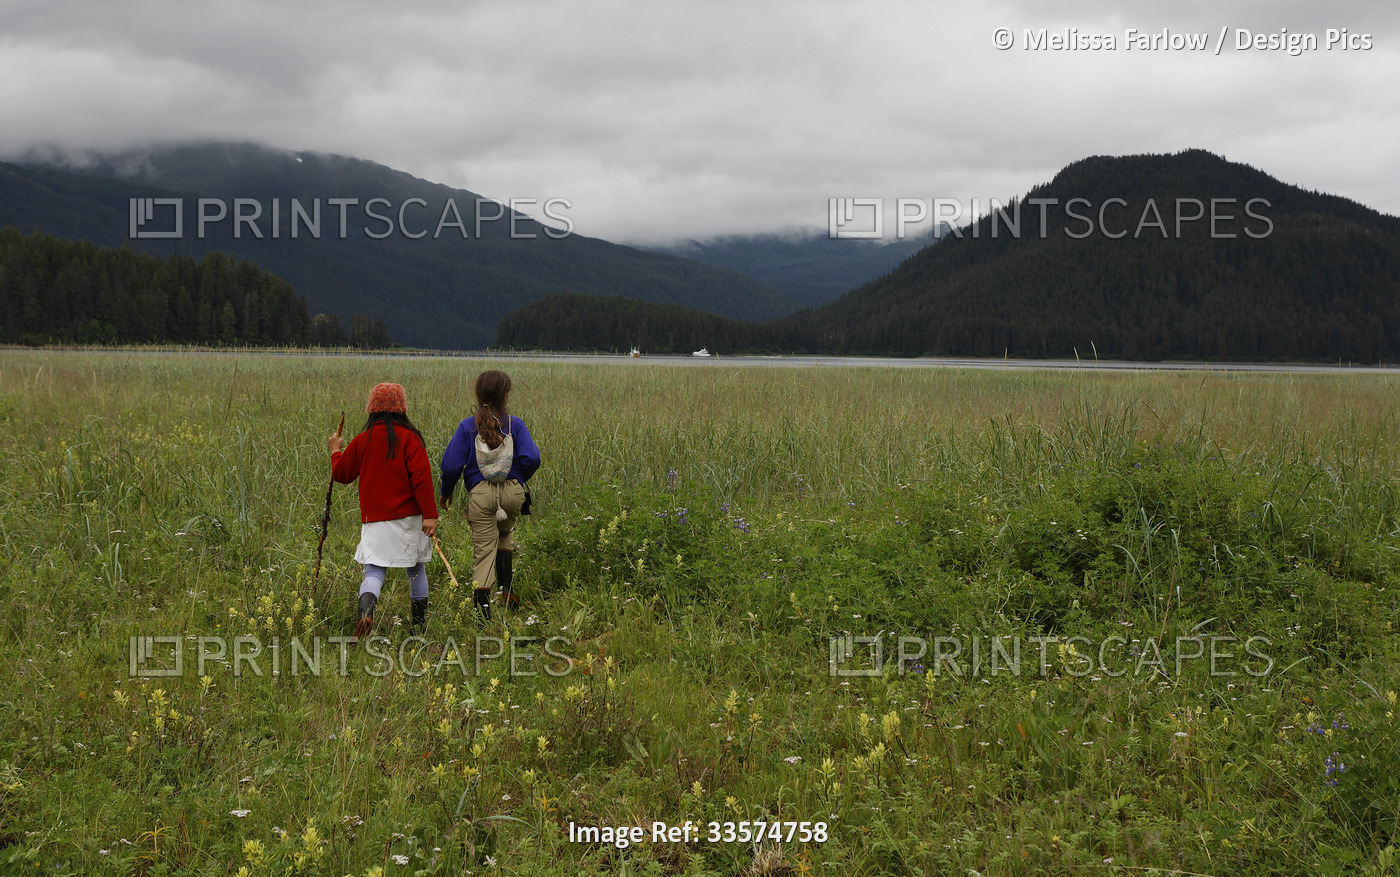 View taken from behind of two young girls hiking through an uplift meadow with ...